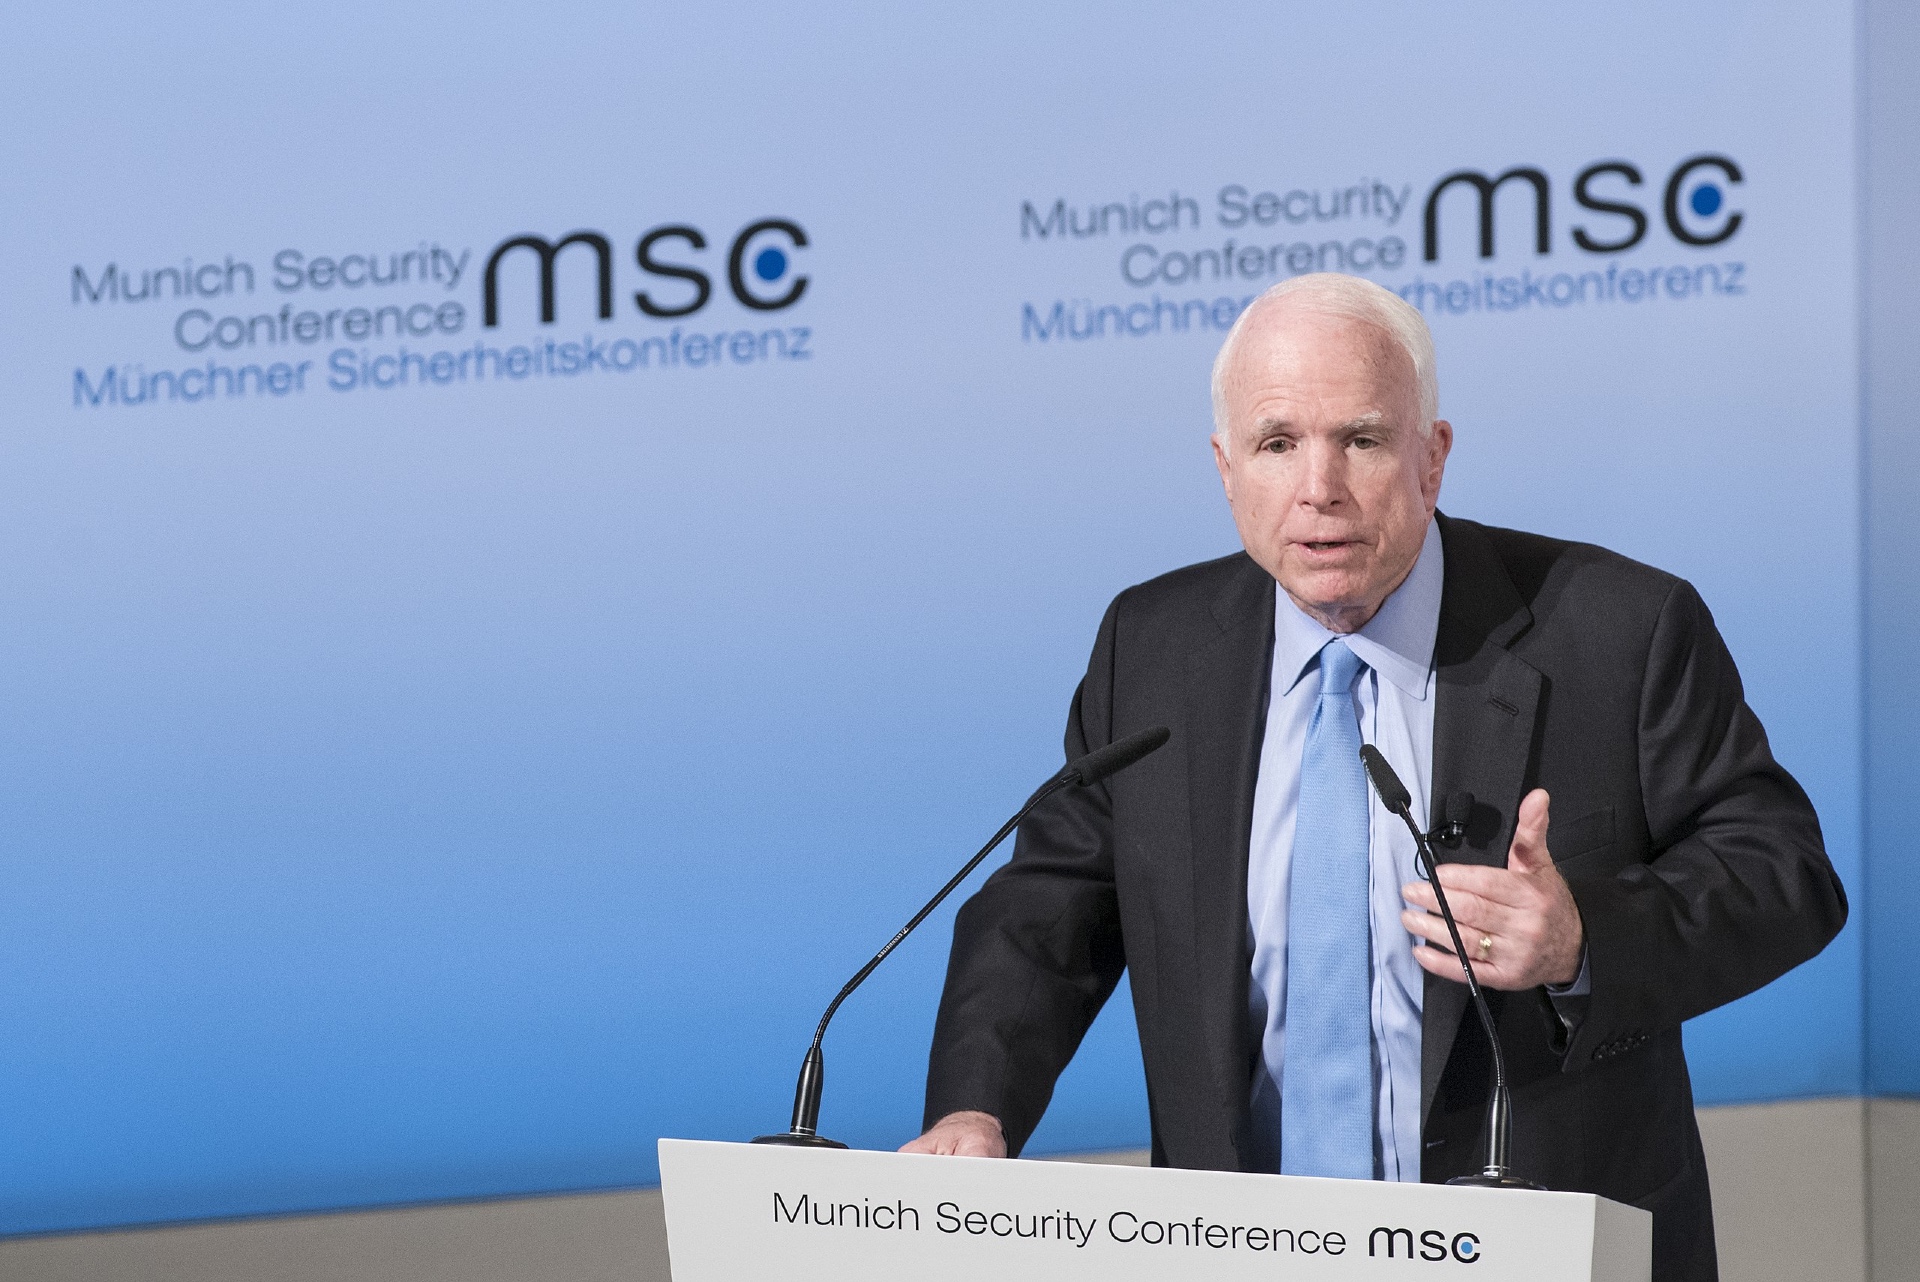 John McCain speaks at the Munich Security Conference I 2017